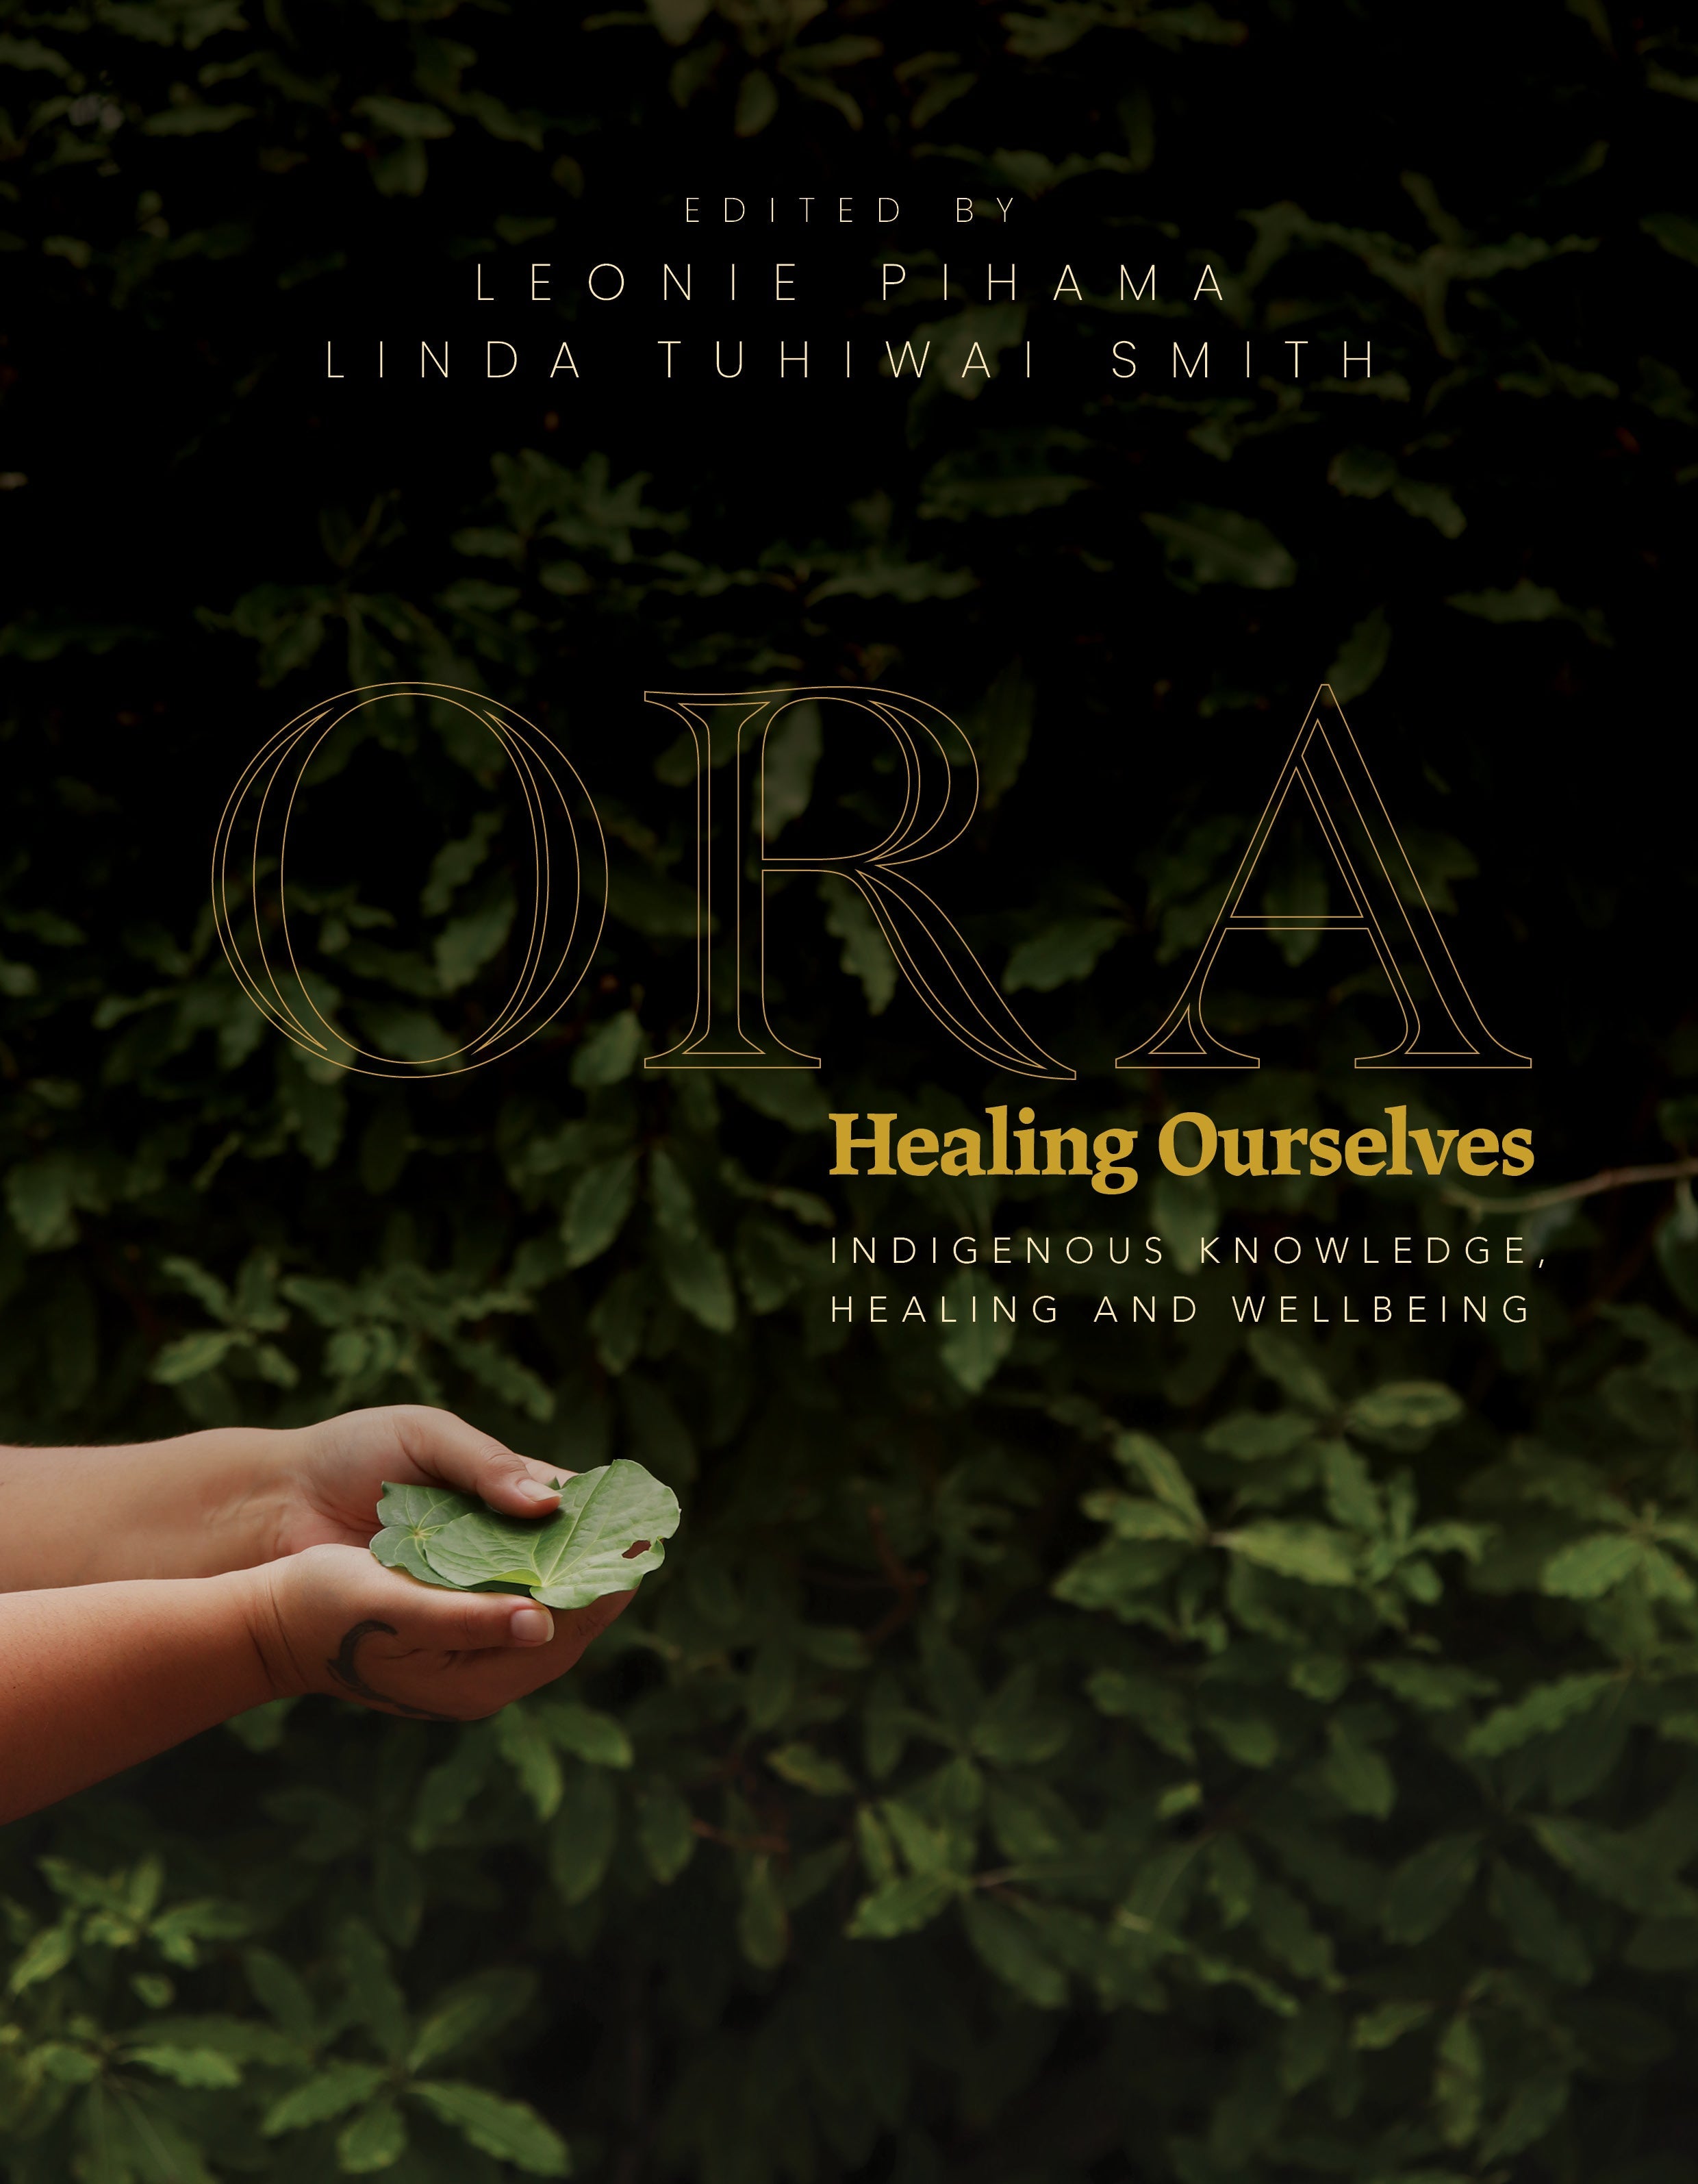 Ora: Healing Ourselves - Indigenous Knowledge Healing and Wellbeing edited by Leonie Pihama & Linda Tuhiwai Smith